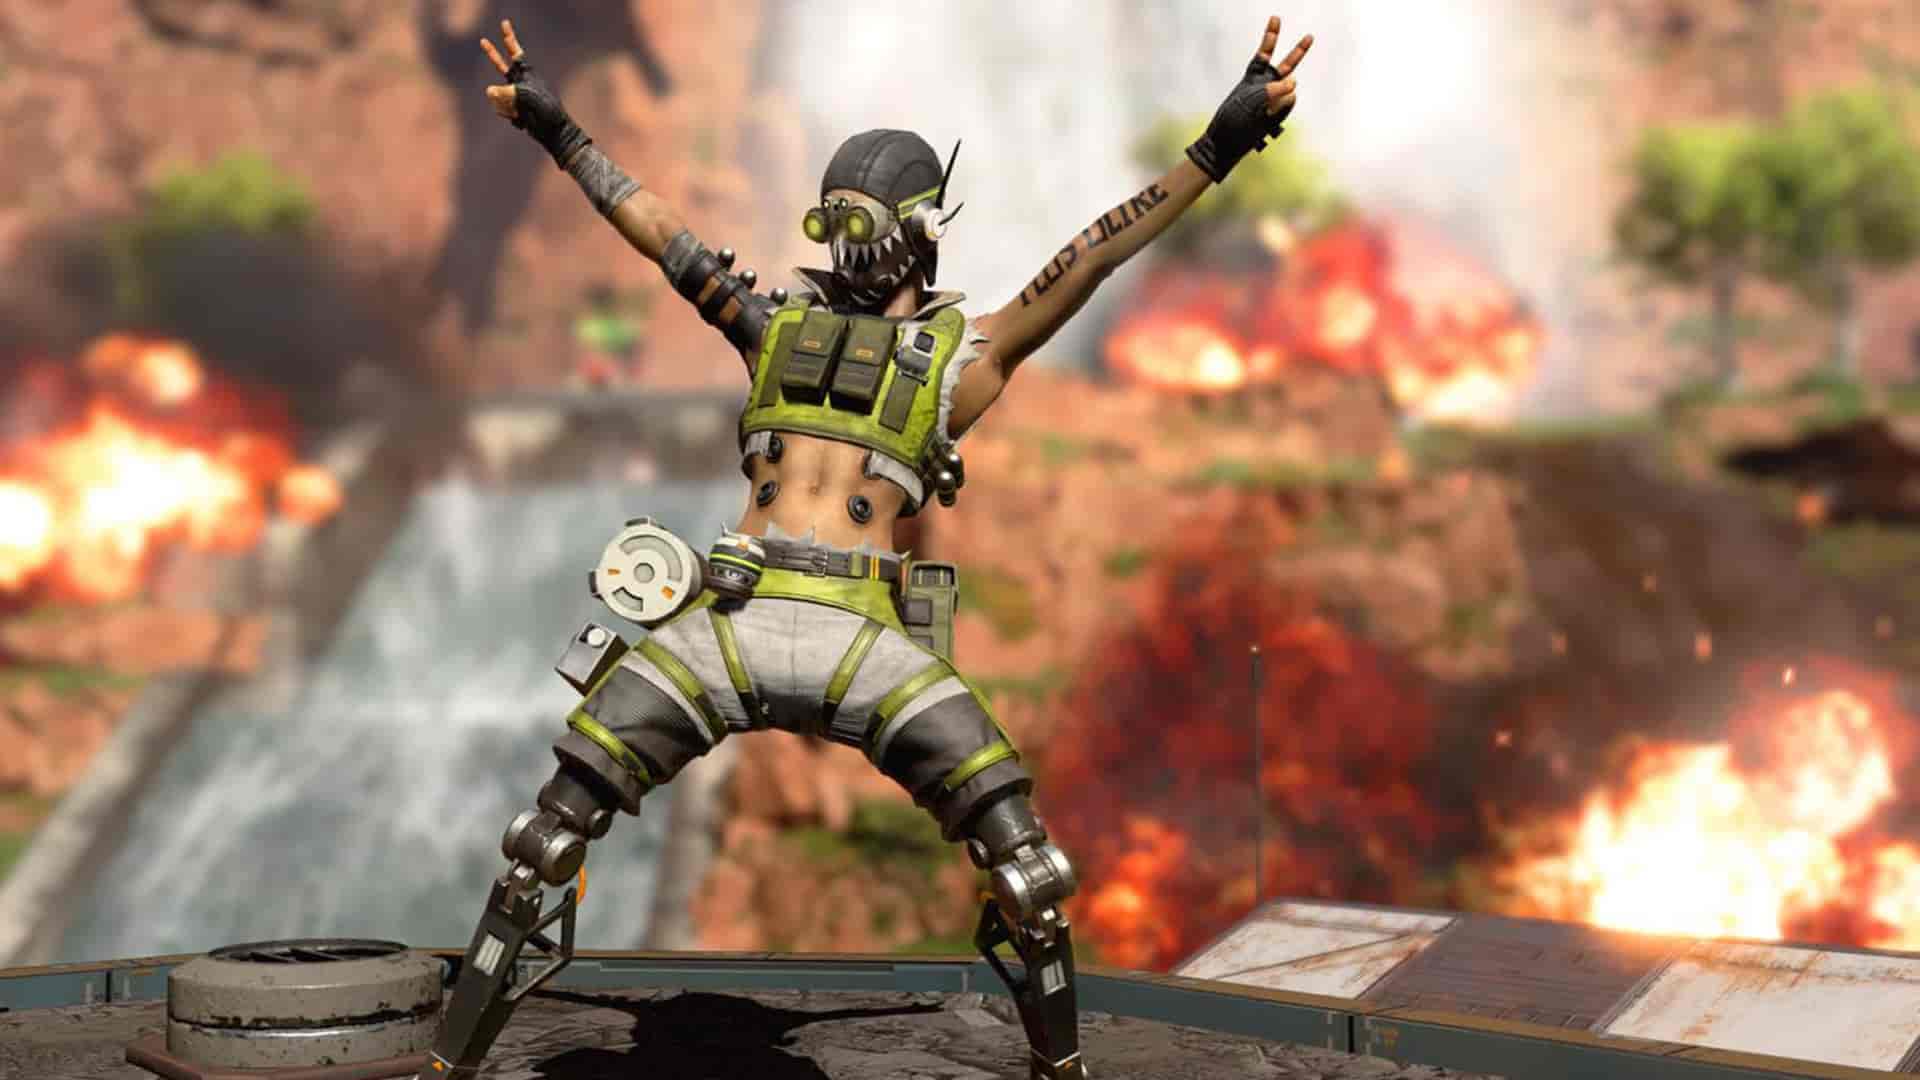 Apex Legends Ps4 Update 1 68 Now Live Features More Bug Fixes And Stability Improvements Playstation Universe